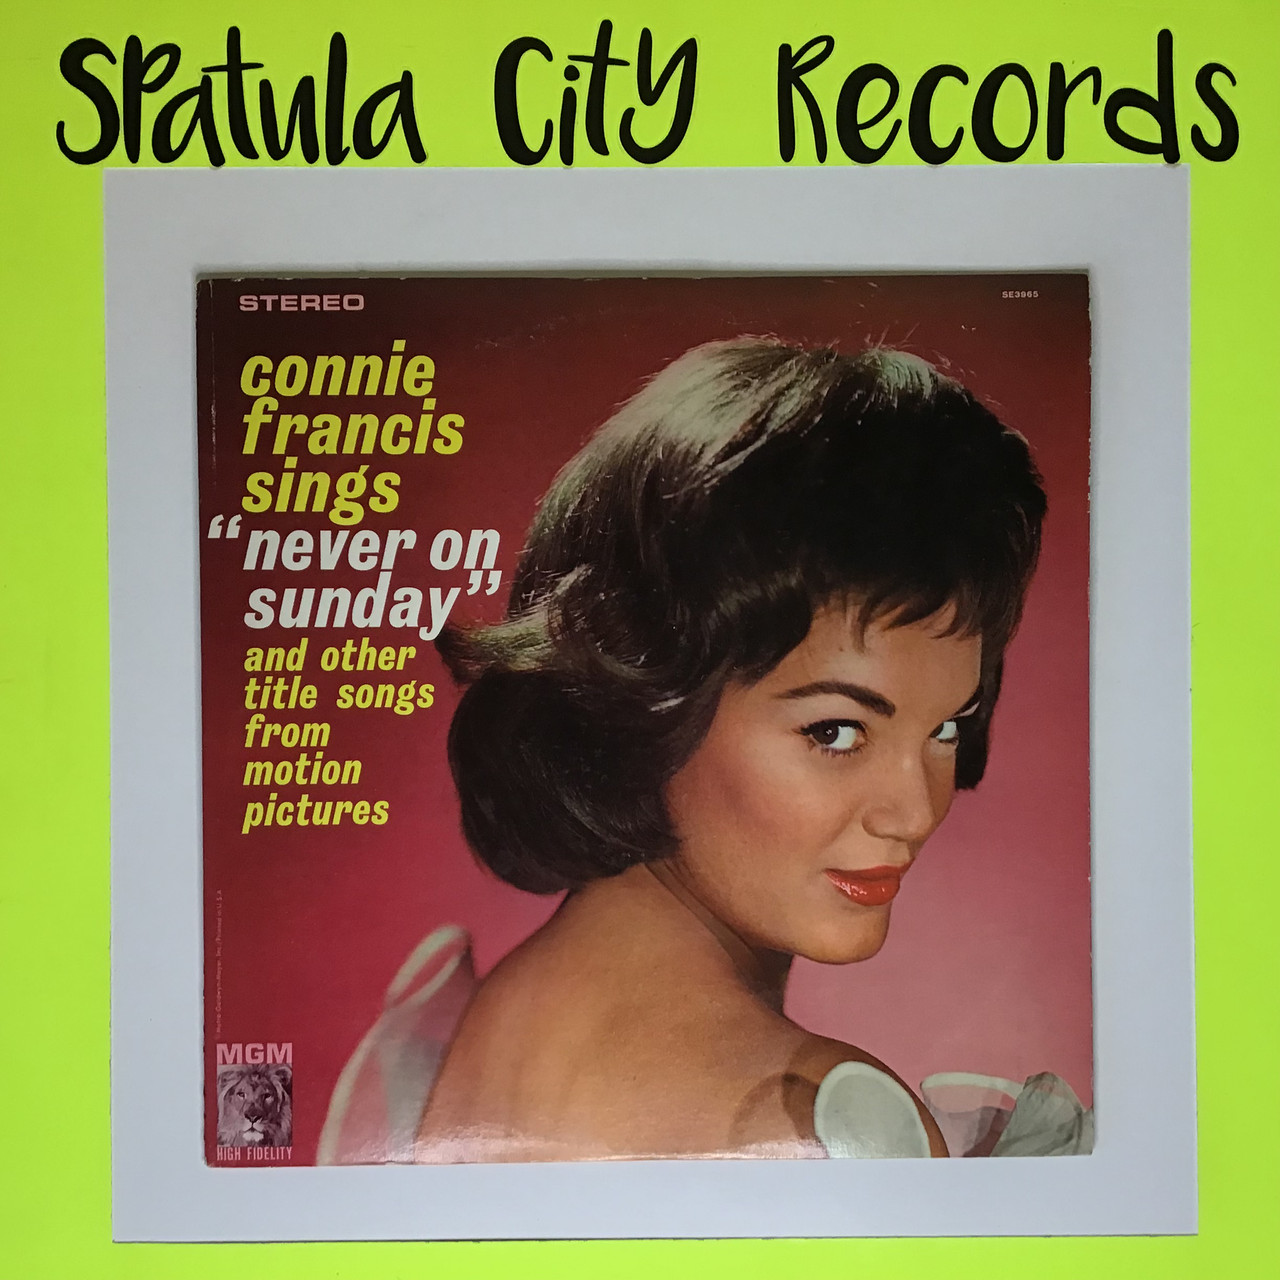 Connie Francis - Sings Never on Sunday and other titles - vinyl record album LP